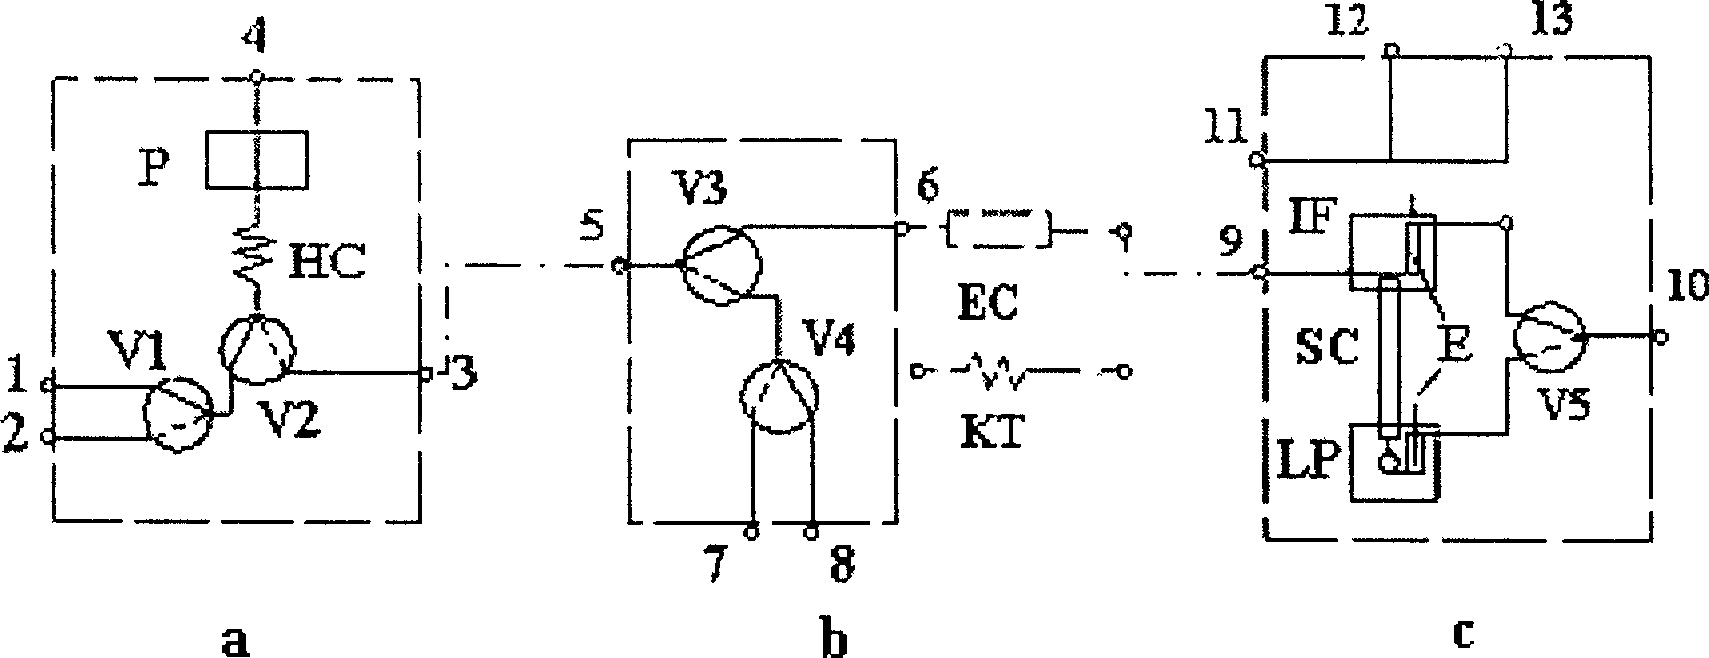 Dynamic and complete analysis system for dynamic electric current